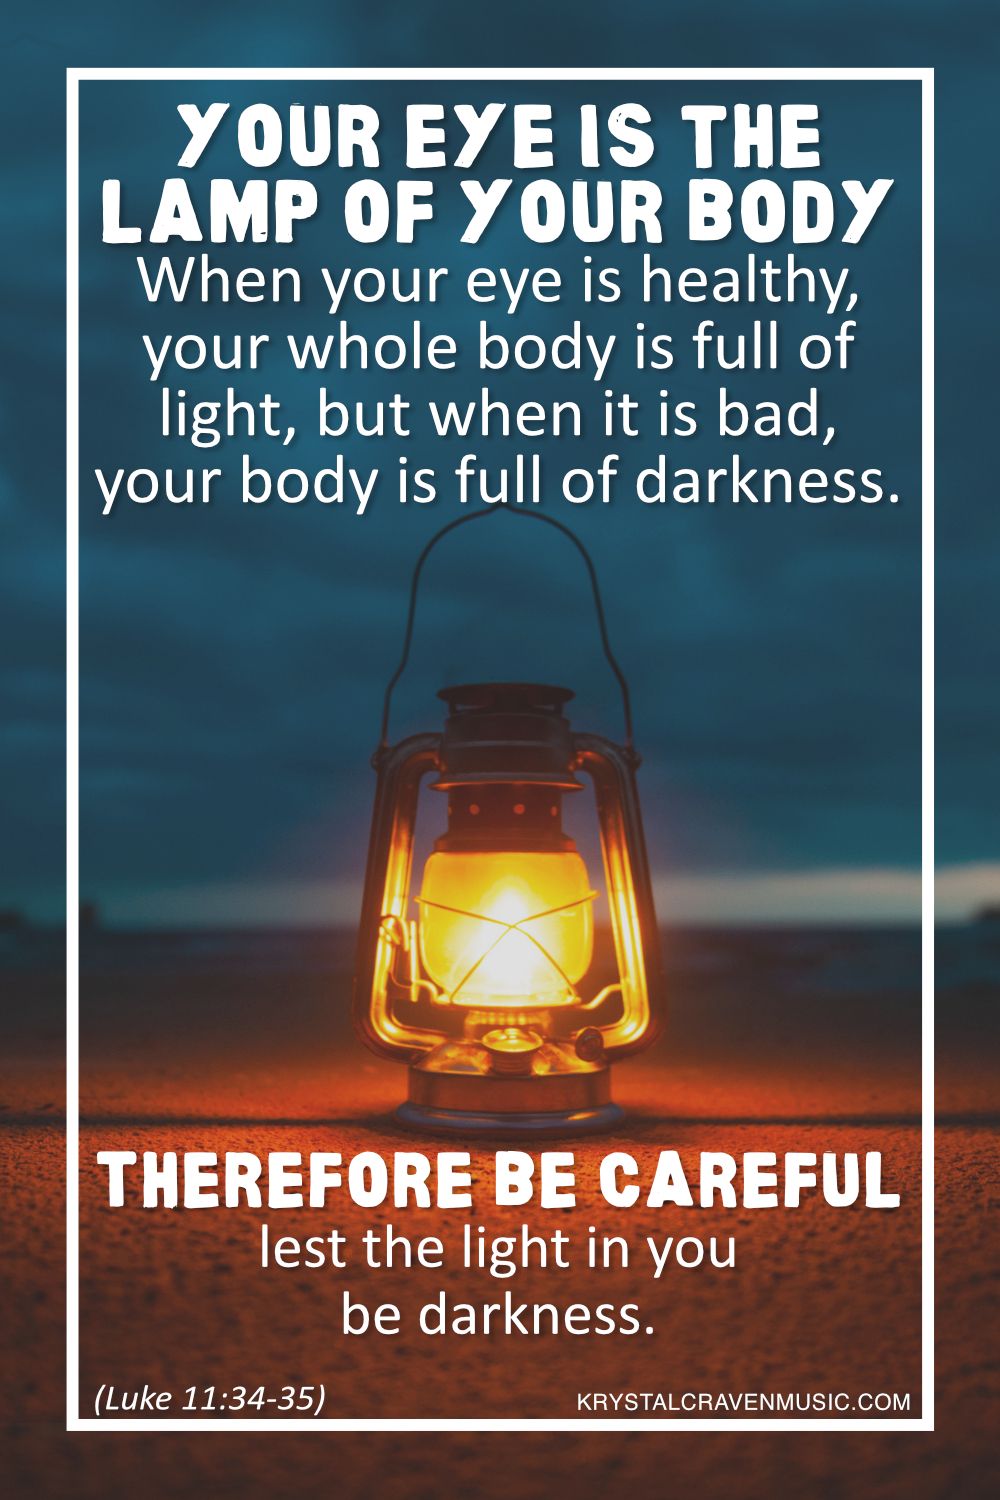 The text from Luke 11:34-35 "Your eye is the lamp of your body. When your eye is healthy, your whole body is full of light, but when it is bad, your body is full of darkness. Therefore be careful lest the light in you be darkness." overlaying a lit lamp at dusk on a beach.